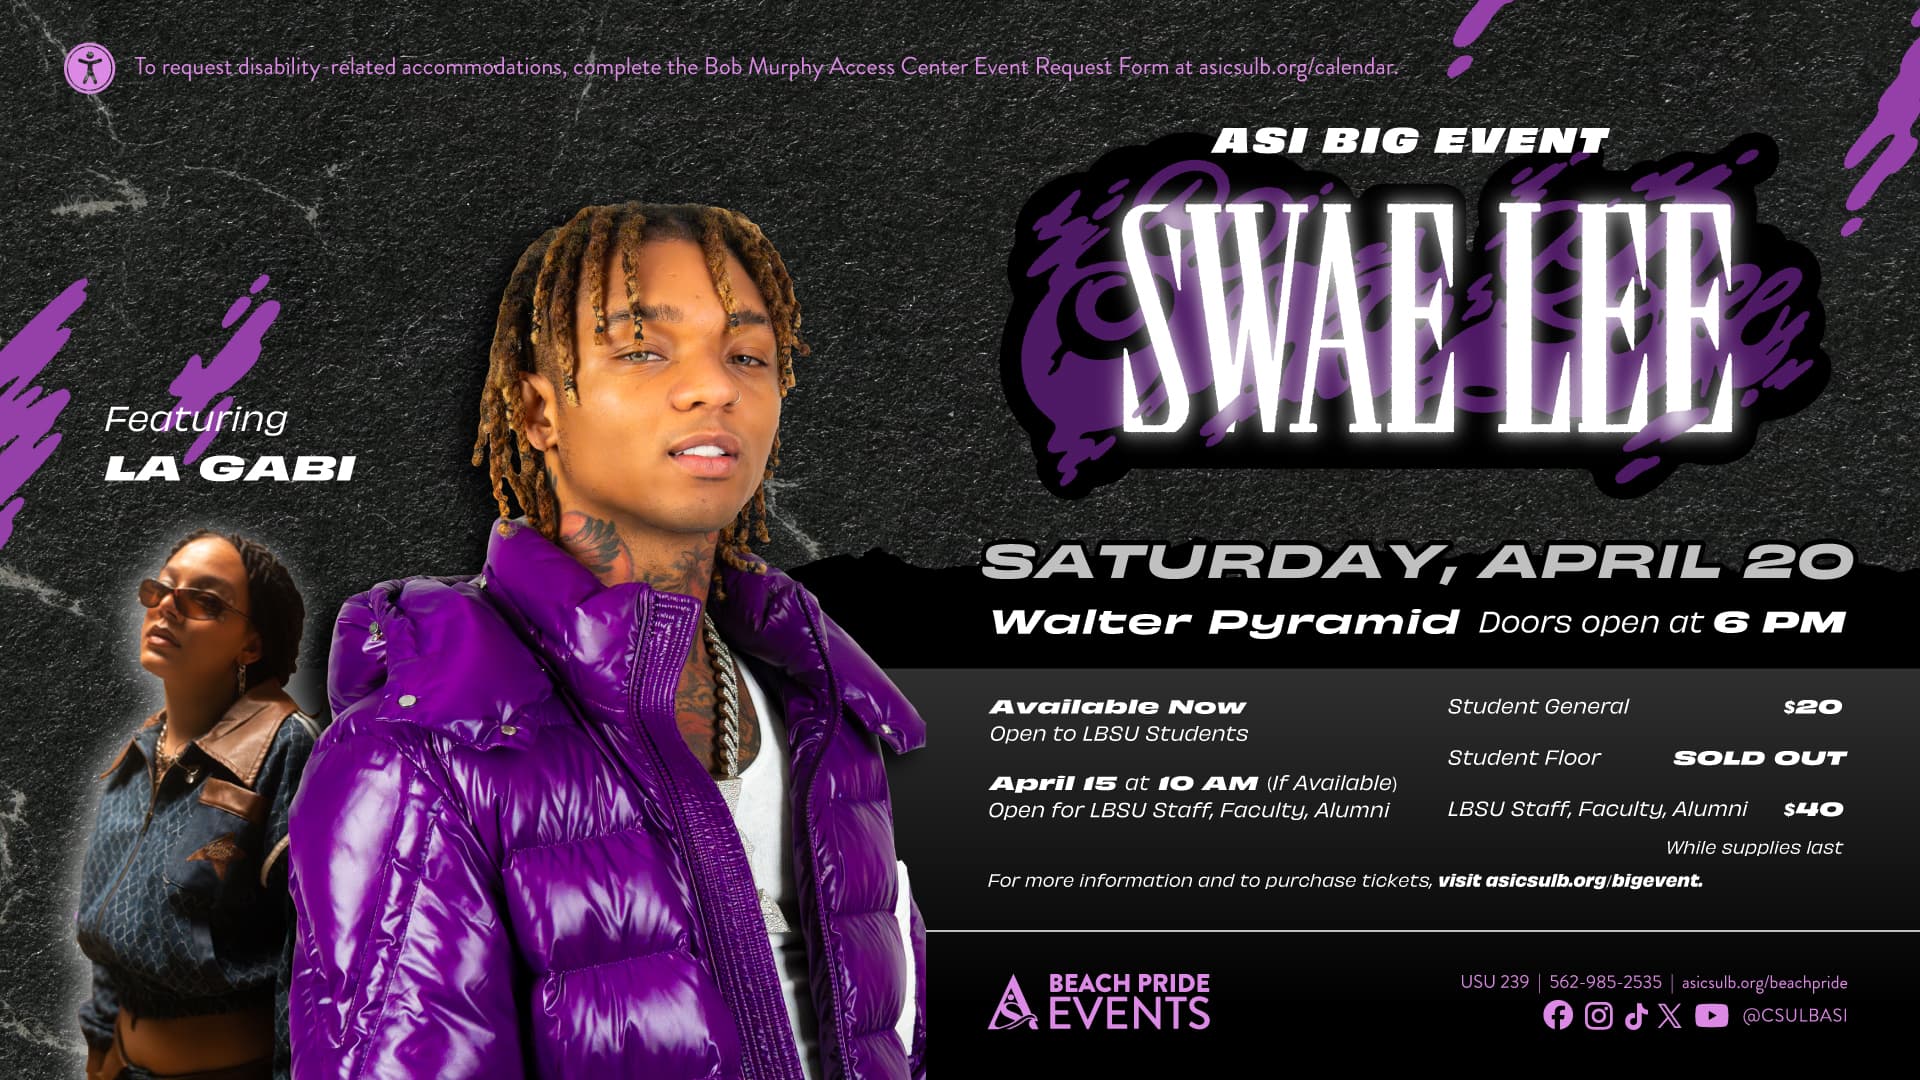 Big Event with Swae Lee April 20th at 7pm in the Walter Pyramid